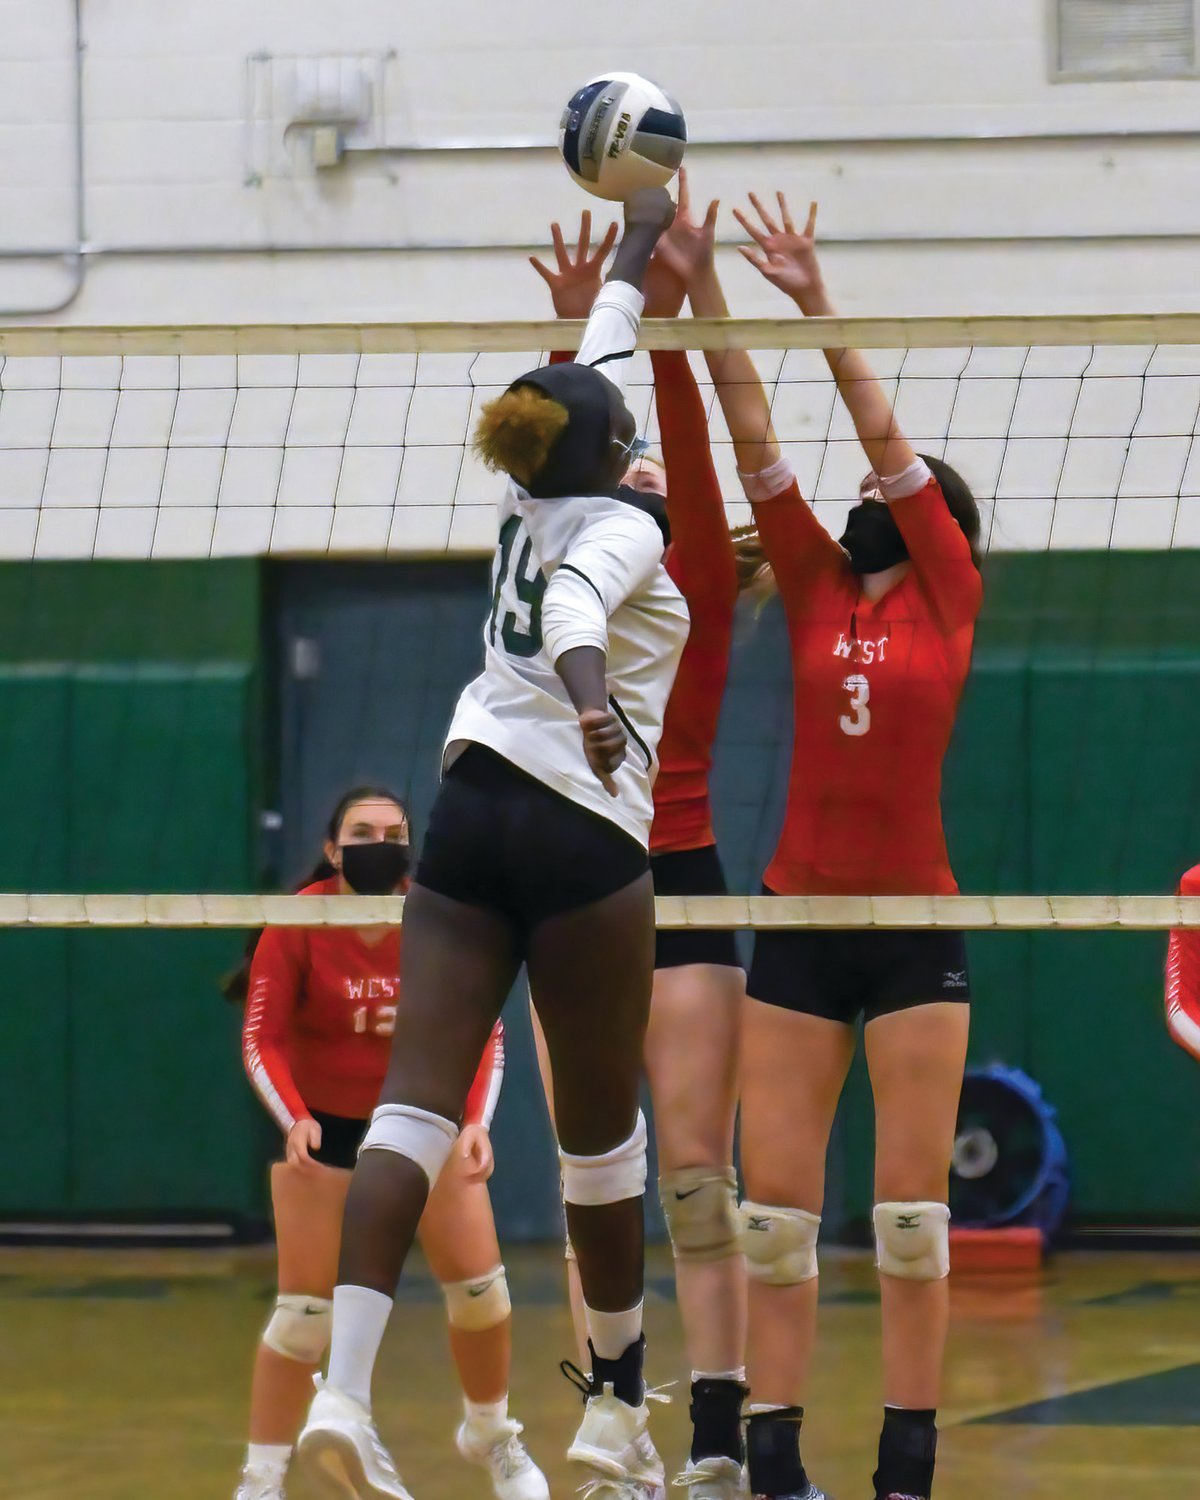 AT THE NET: West’s Eve Anthony jumps to block a shot.